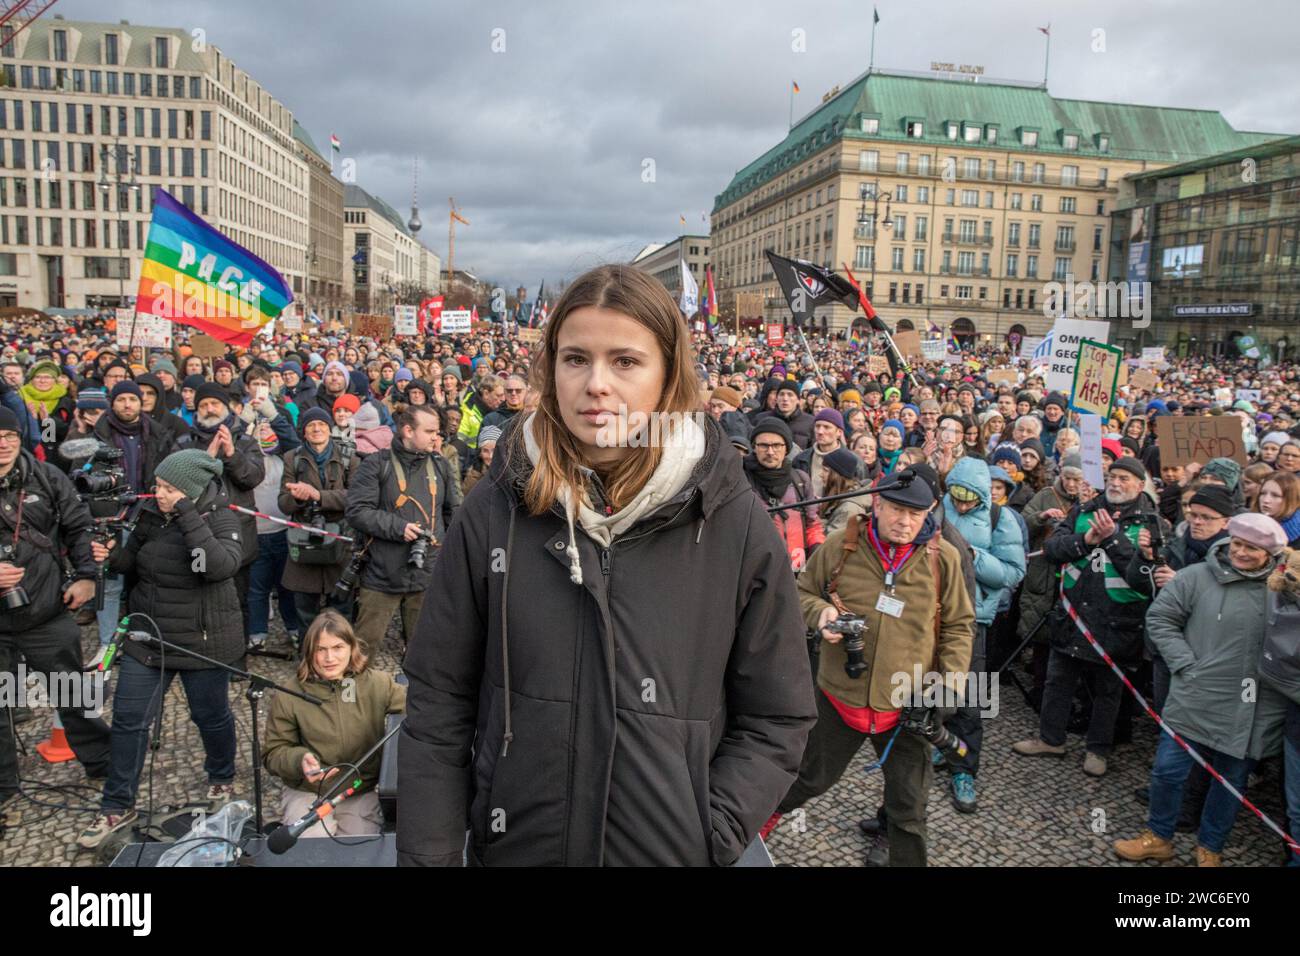 January 14, 2024, Berlin, Germany: Luisa Neubauer delivered a speech at the protest. Neubauer, born on April 21, 1996, in Hamburg, is a prominent German climate activist and publicist known for leading Germany's Fridays for Future movement. As a significant figure in climate activism, Neubauer advocates for policies aligned with the Paris Agreement and has been a vocal proponent of Germany's transition from coal by 2030. Her Alliance 90/The Greens and the Green Youth membership reflects her deep commitment to environmental issues. In an unparalleled show of solidarity, the streets of Berlin on Stock Photo